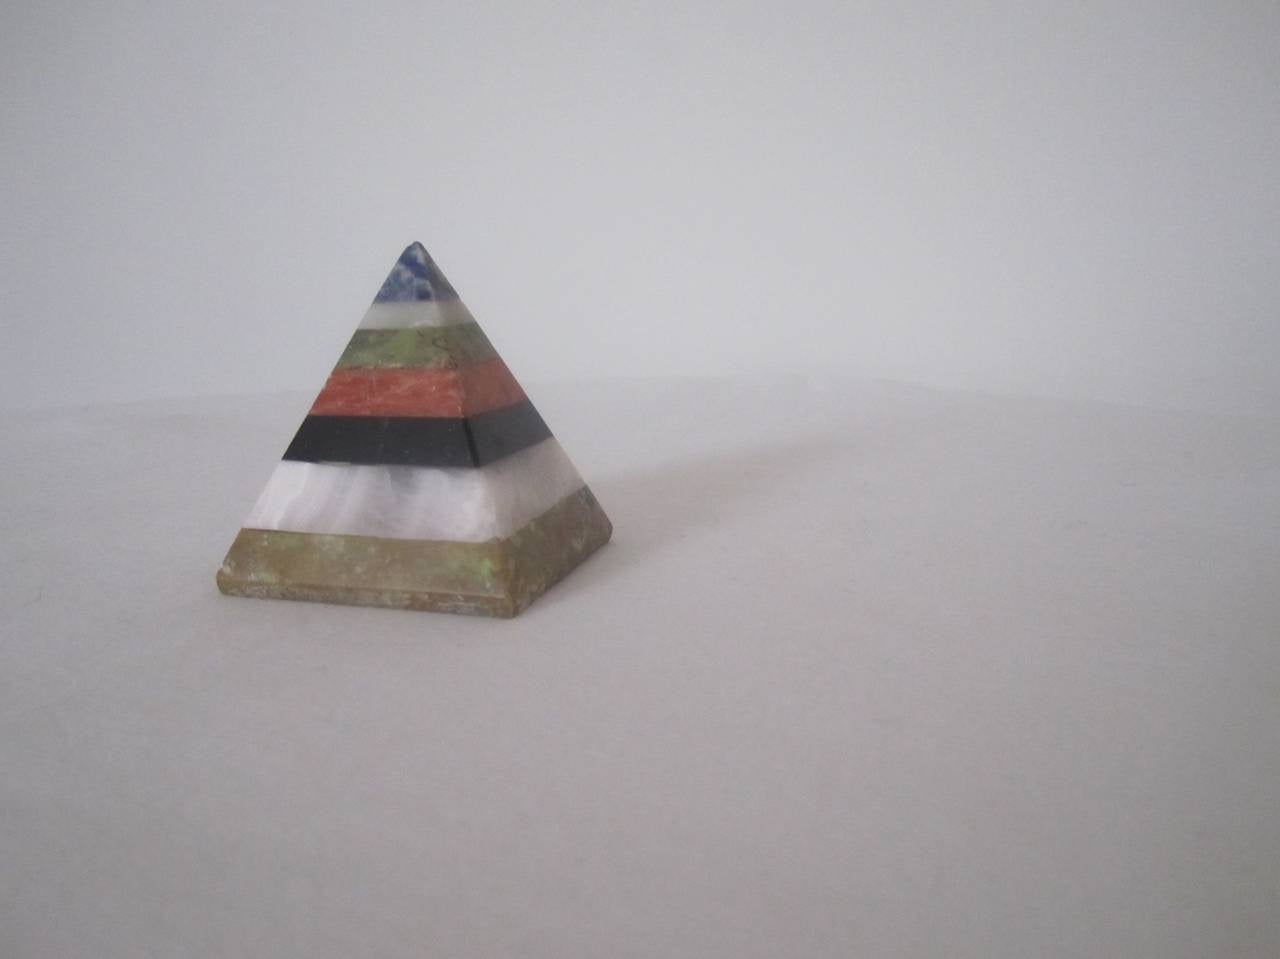 A very chic vintage layered multi-stone pyramid including Blue Lapis and Black Onyx. Six natural stones in all. Flea-bite nick at top. Could make a great paperweight, desk, table or bookshelf accessory. 

Available here online, and at my showroom